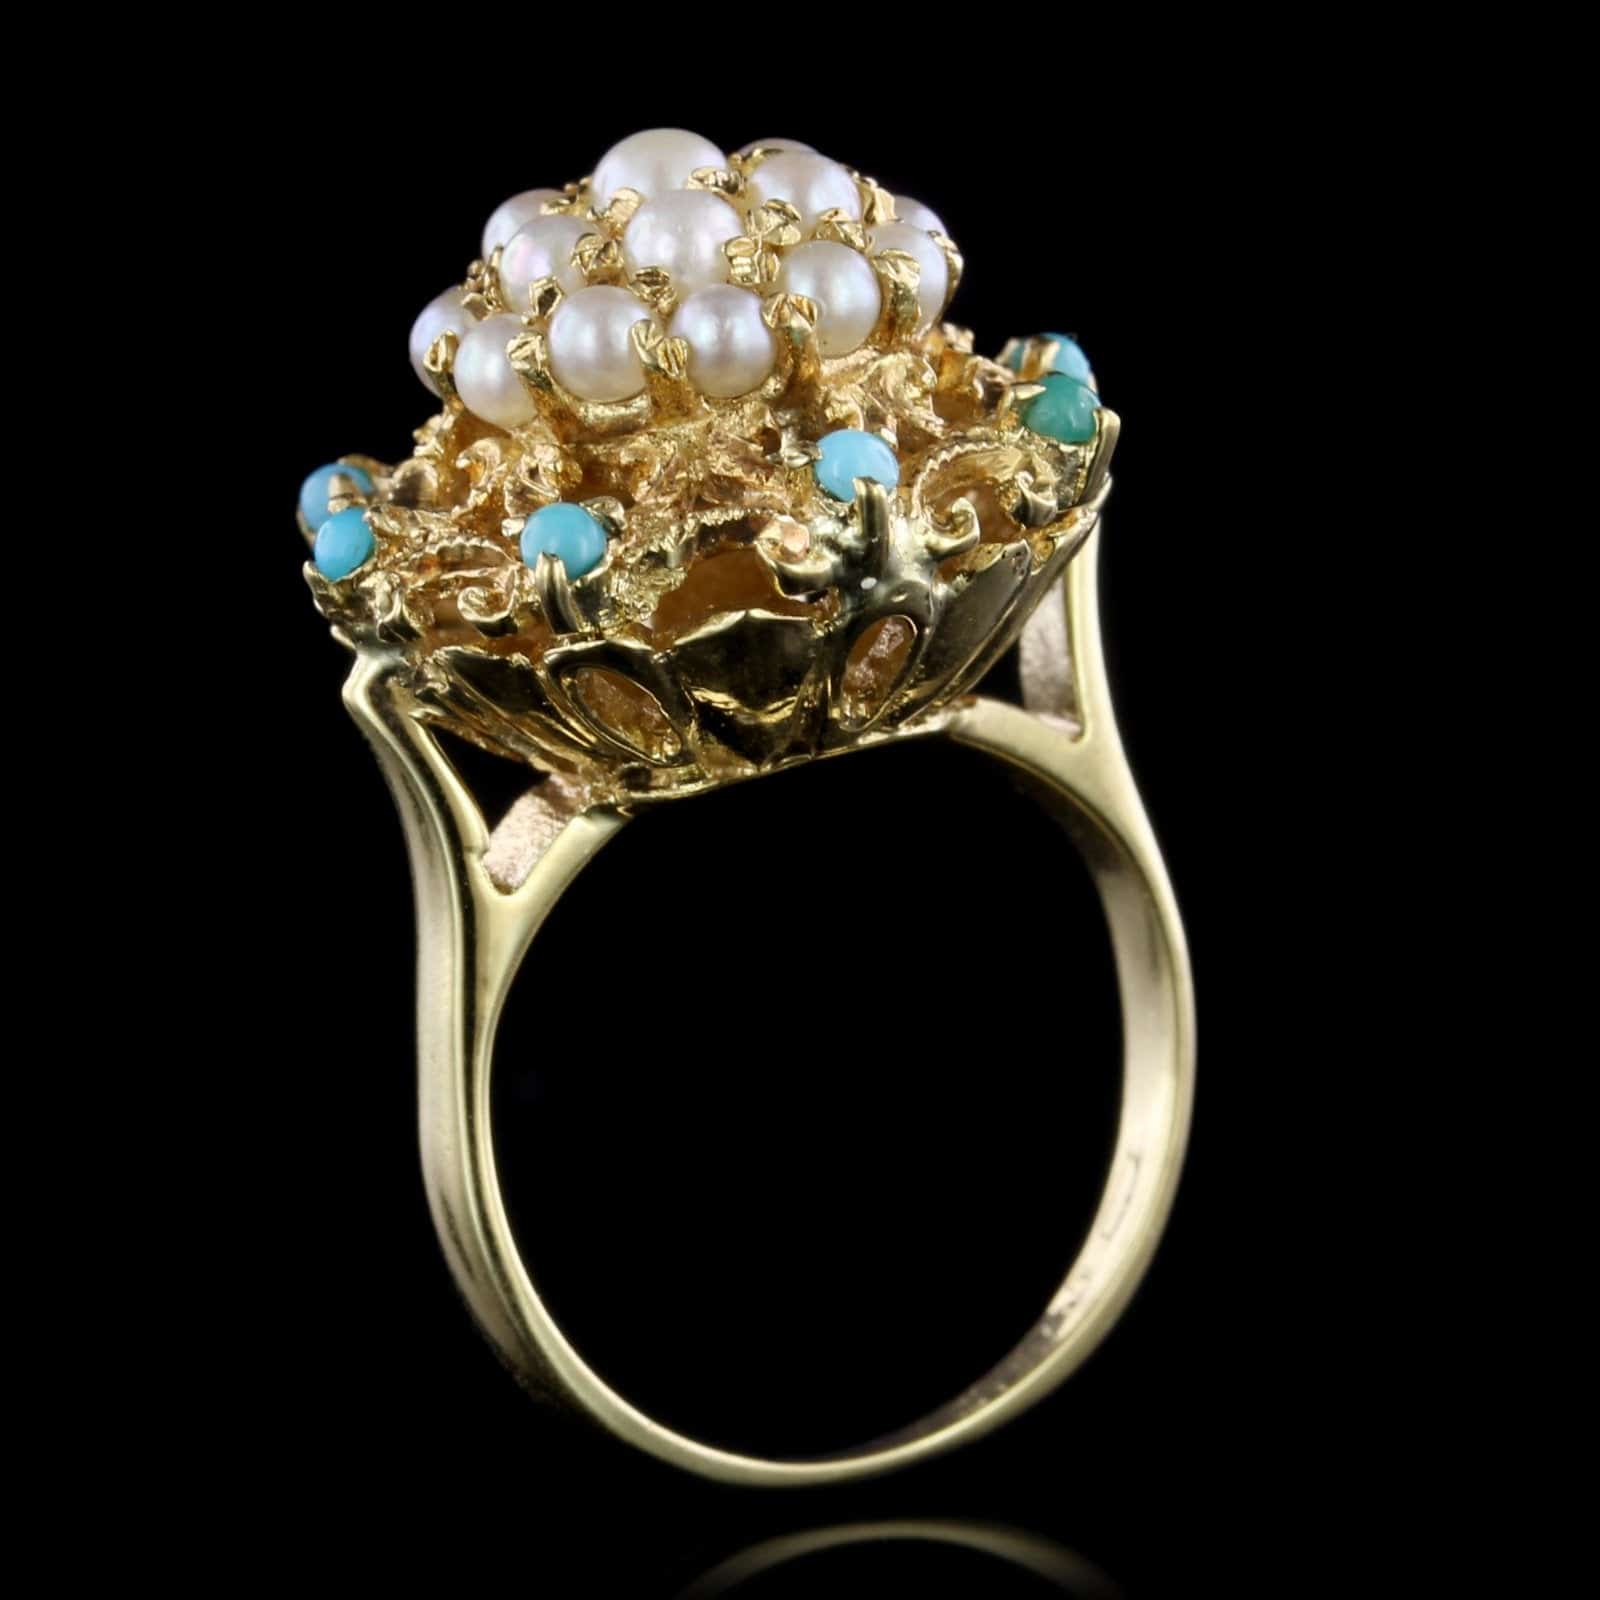 18K Yellow Gold Estate Cultured Pearl and Turquoise Ring